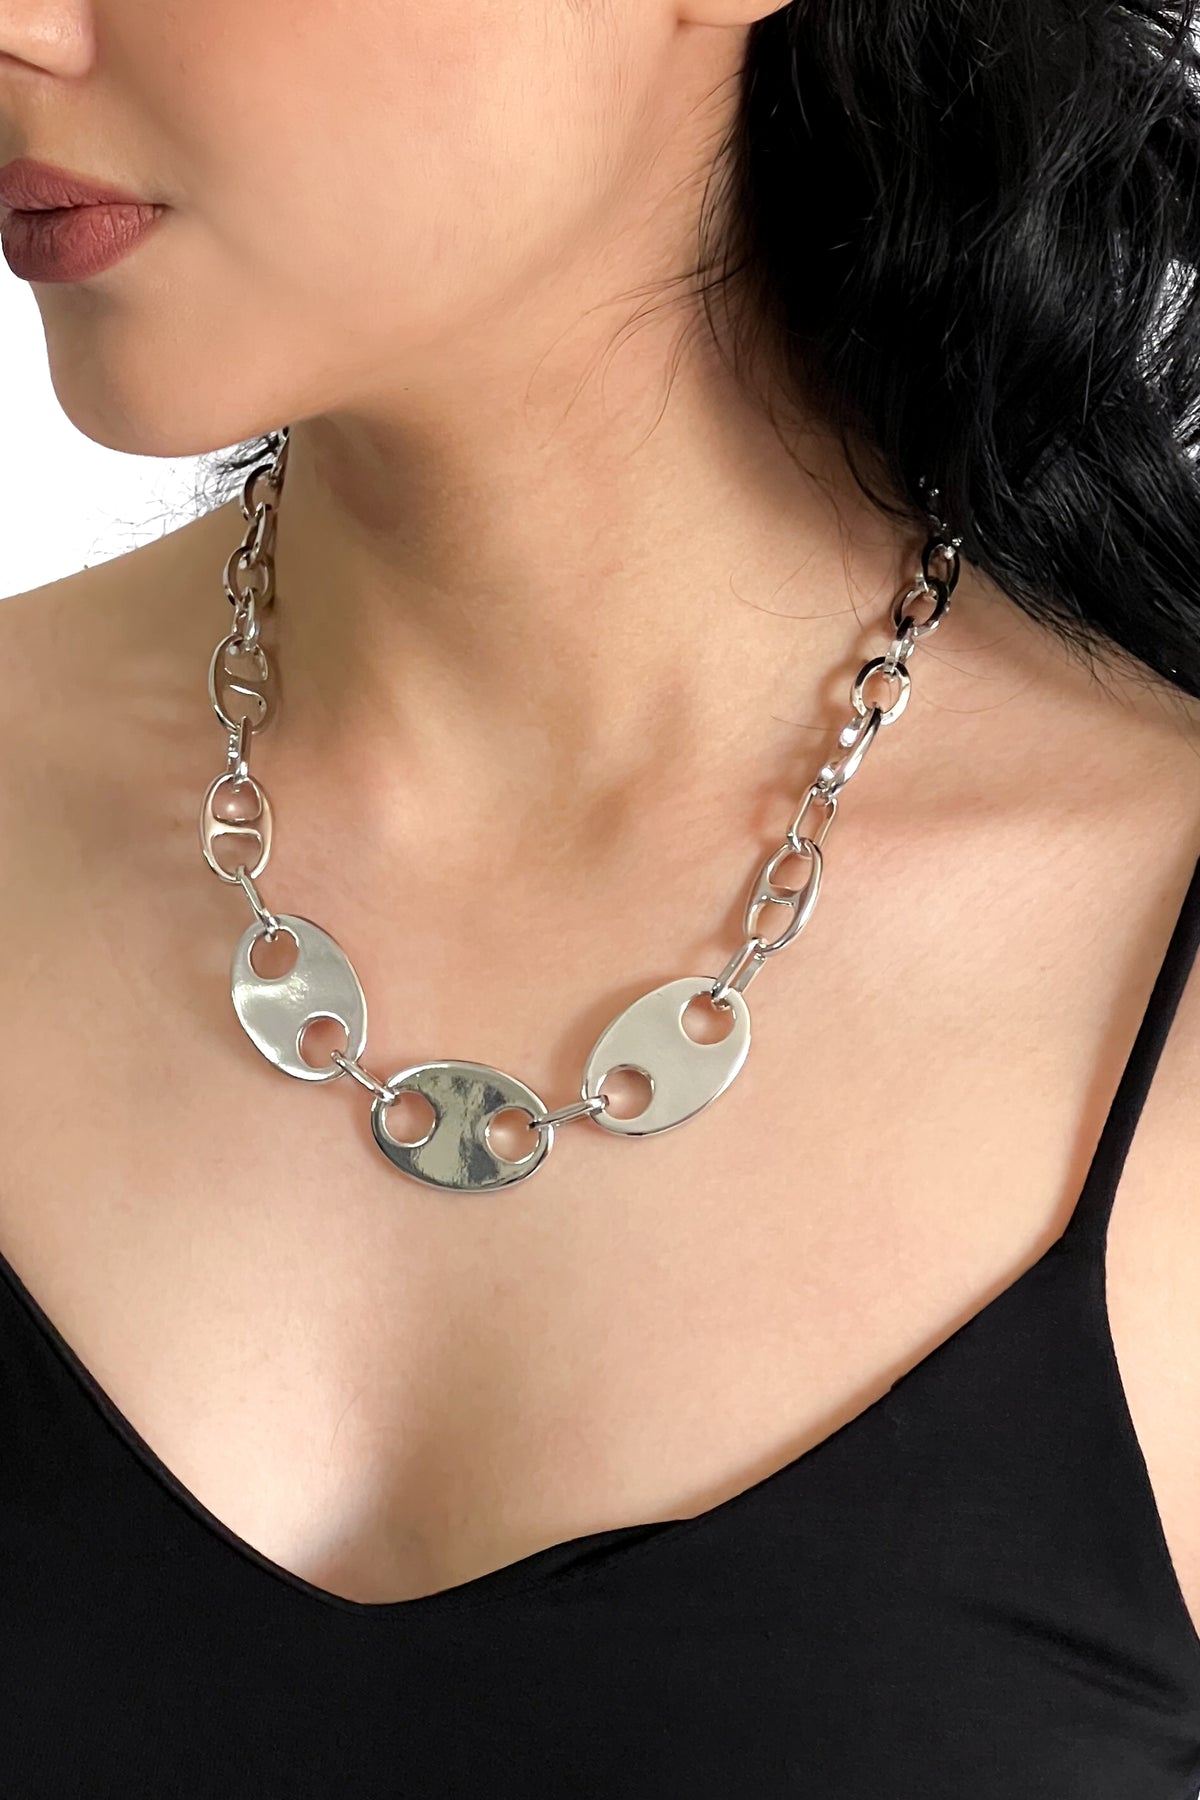 silver chain necklace with 3 chunky silver pendants